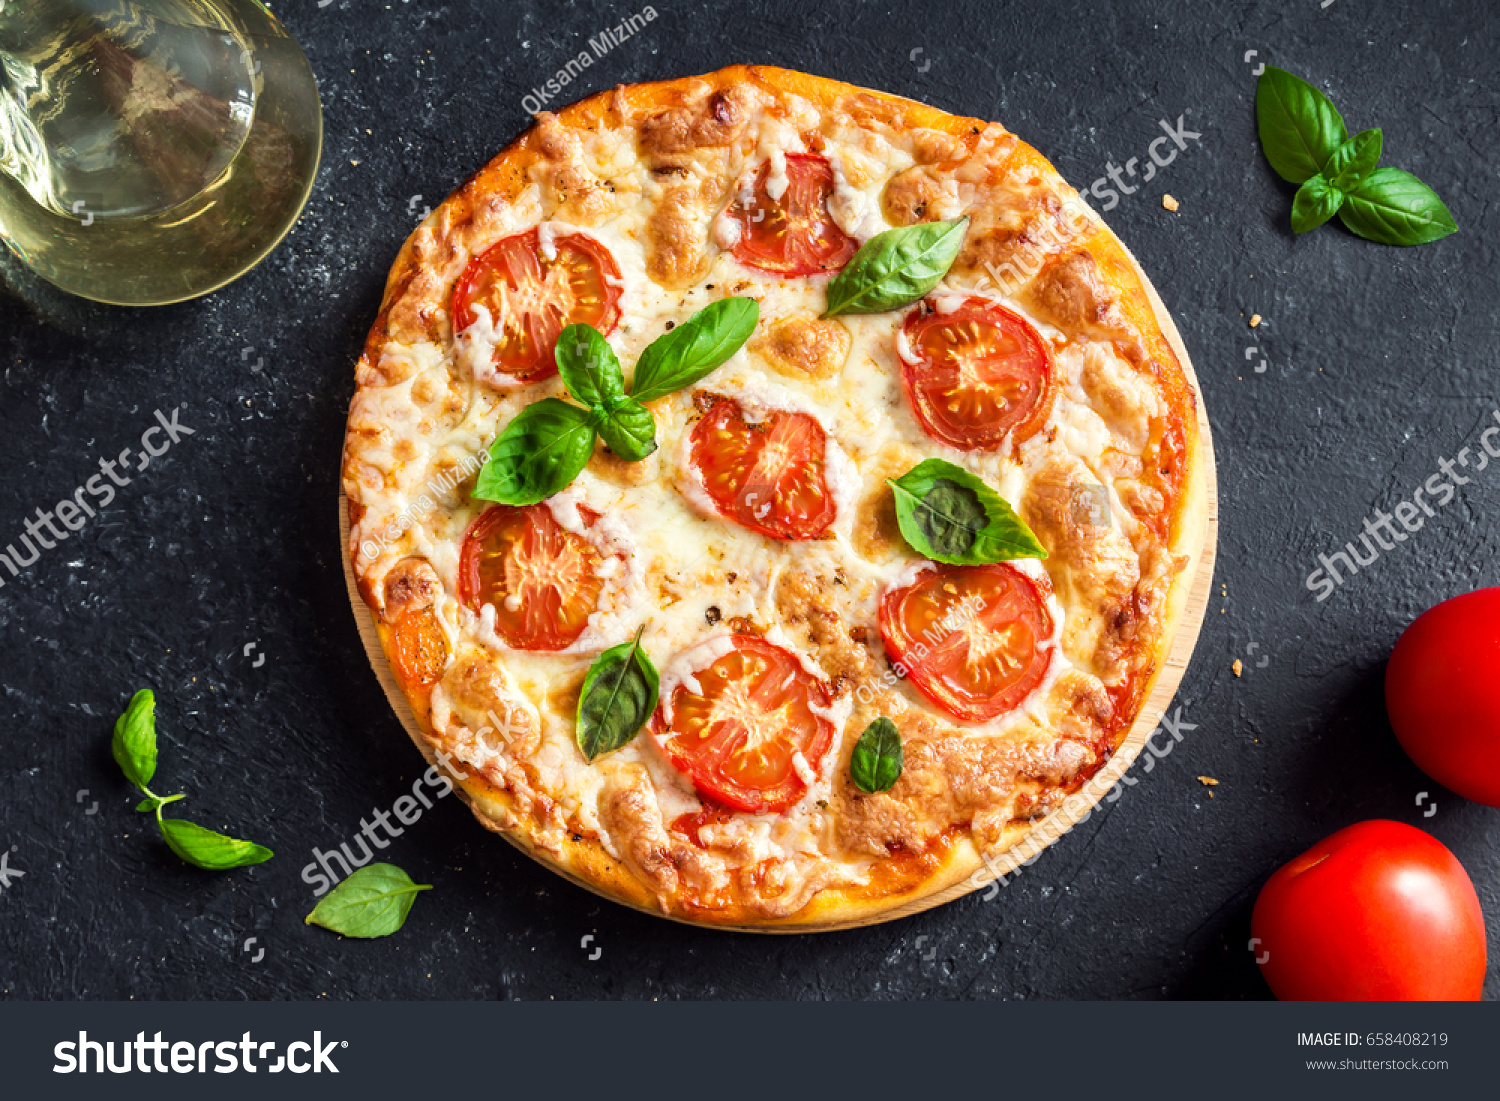 Pizza Margherita on black stone background. Homemade Pizza Margarita with Tomatoes, Basil and Mozzarella Cheese. #658408219